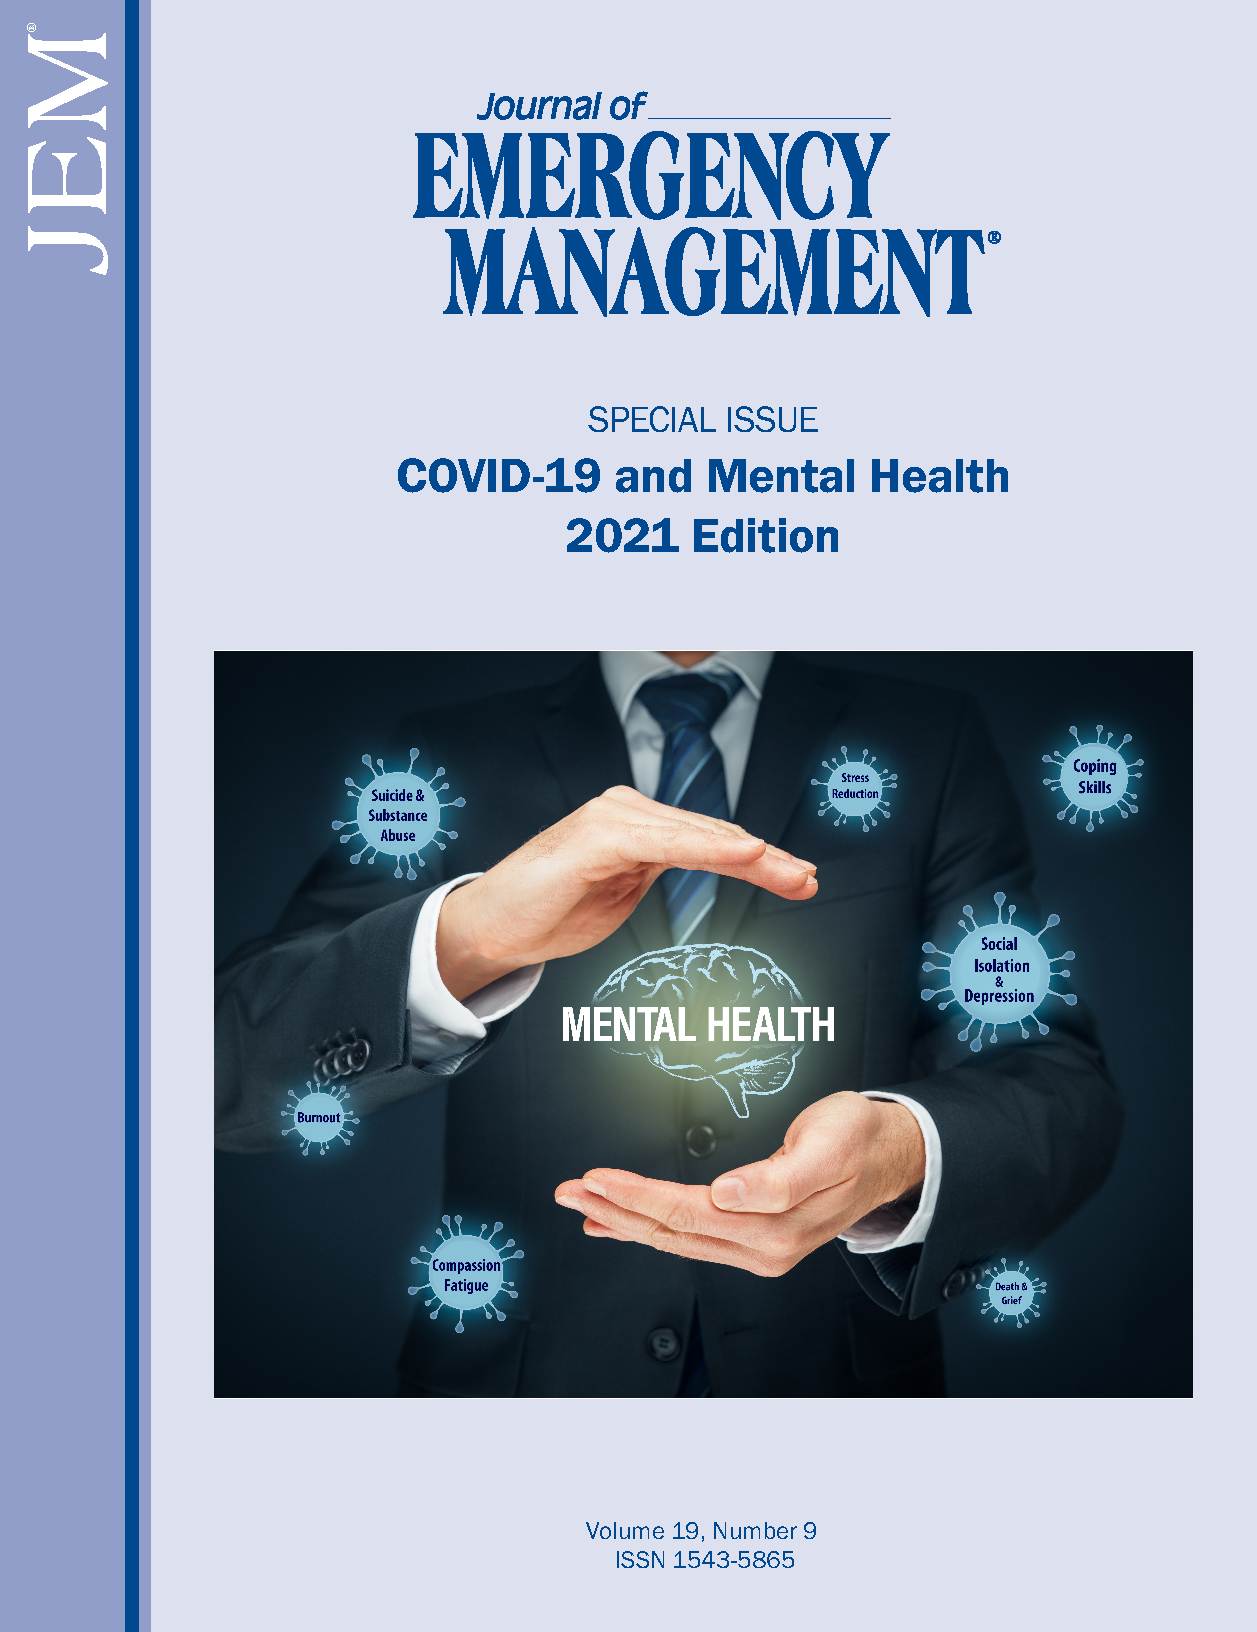 					View Vol. 19 No. 9 (2021): Special Issue on COVID-19 and Mental Health - 2021 Edition
				